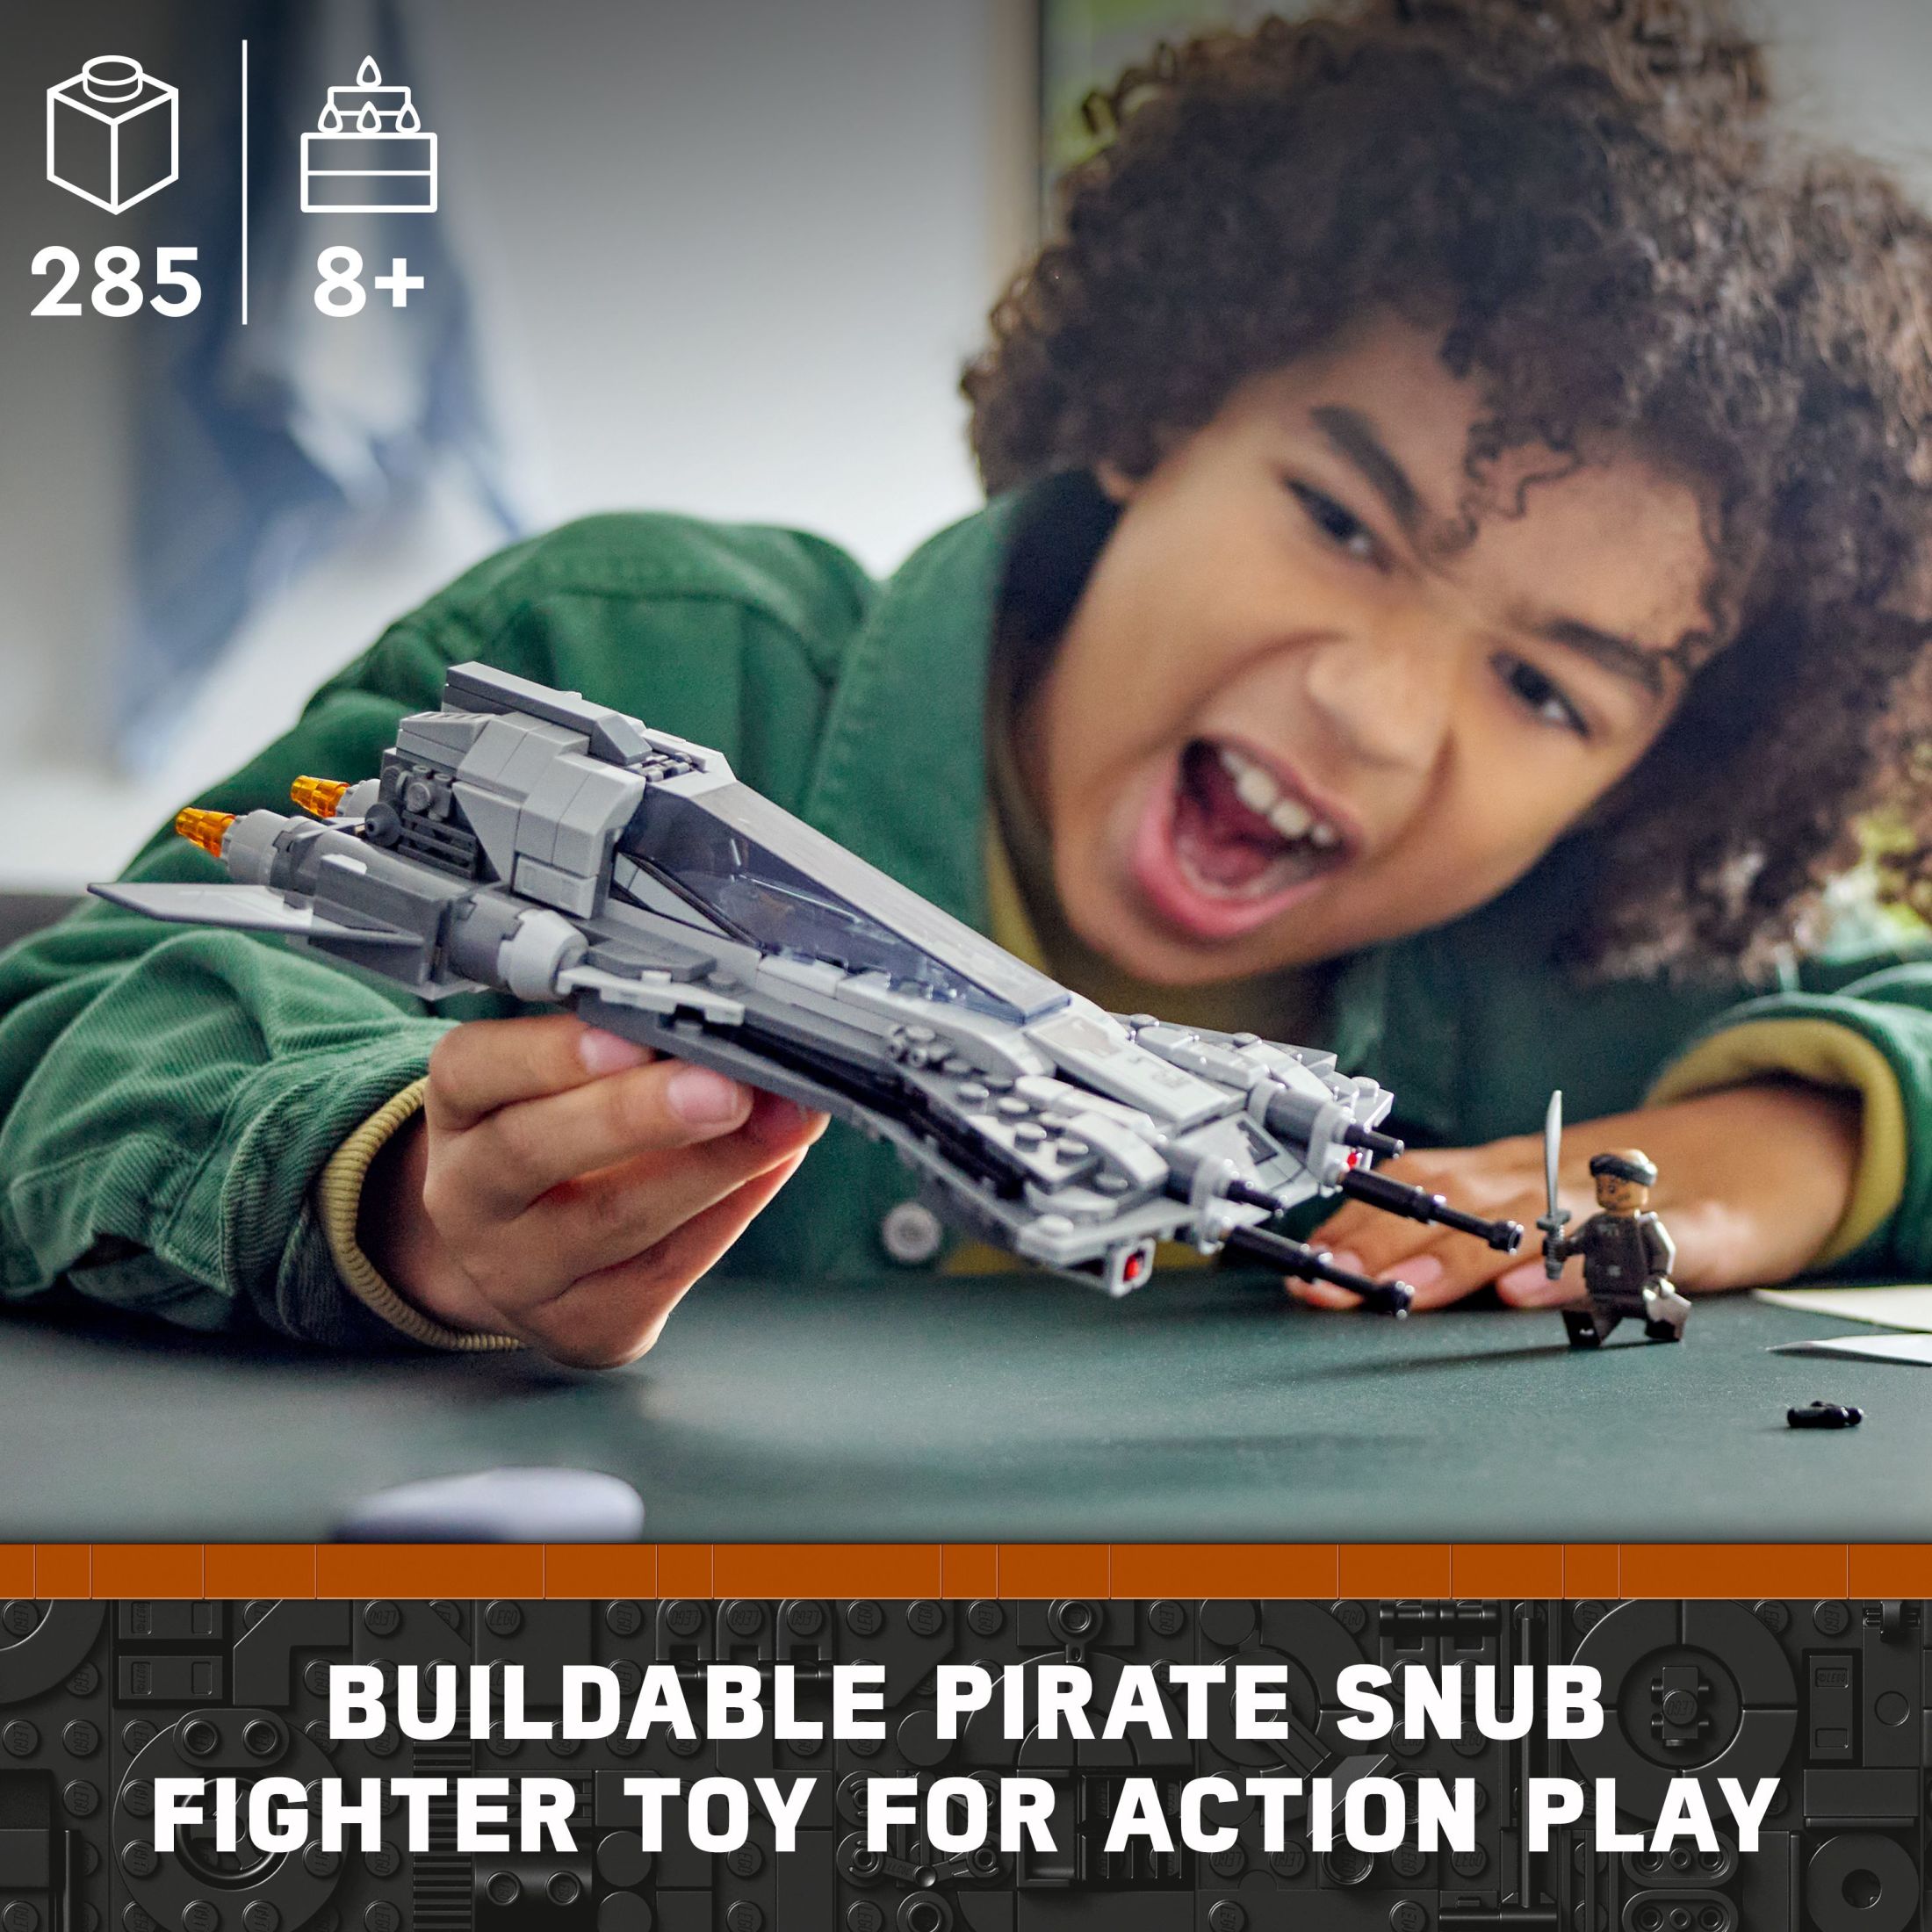 LEGO Star Wars Pirate Snub Fighter 75346 Buildable Starfighter Playset Featuring Pirate Pilot and Vane Characters from the Mandalorian Season 3, Birthday Gift Idea for Boys and Girls Ages 8 and up - image 5 of 10